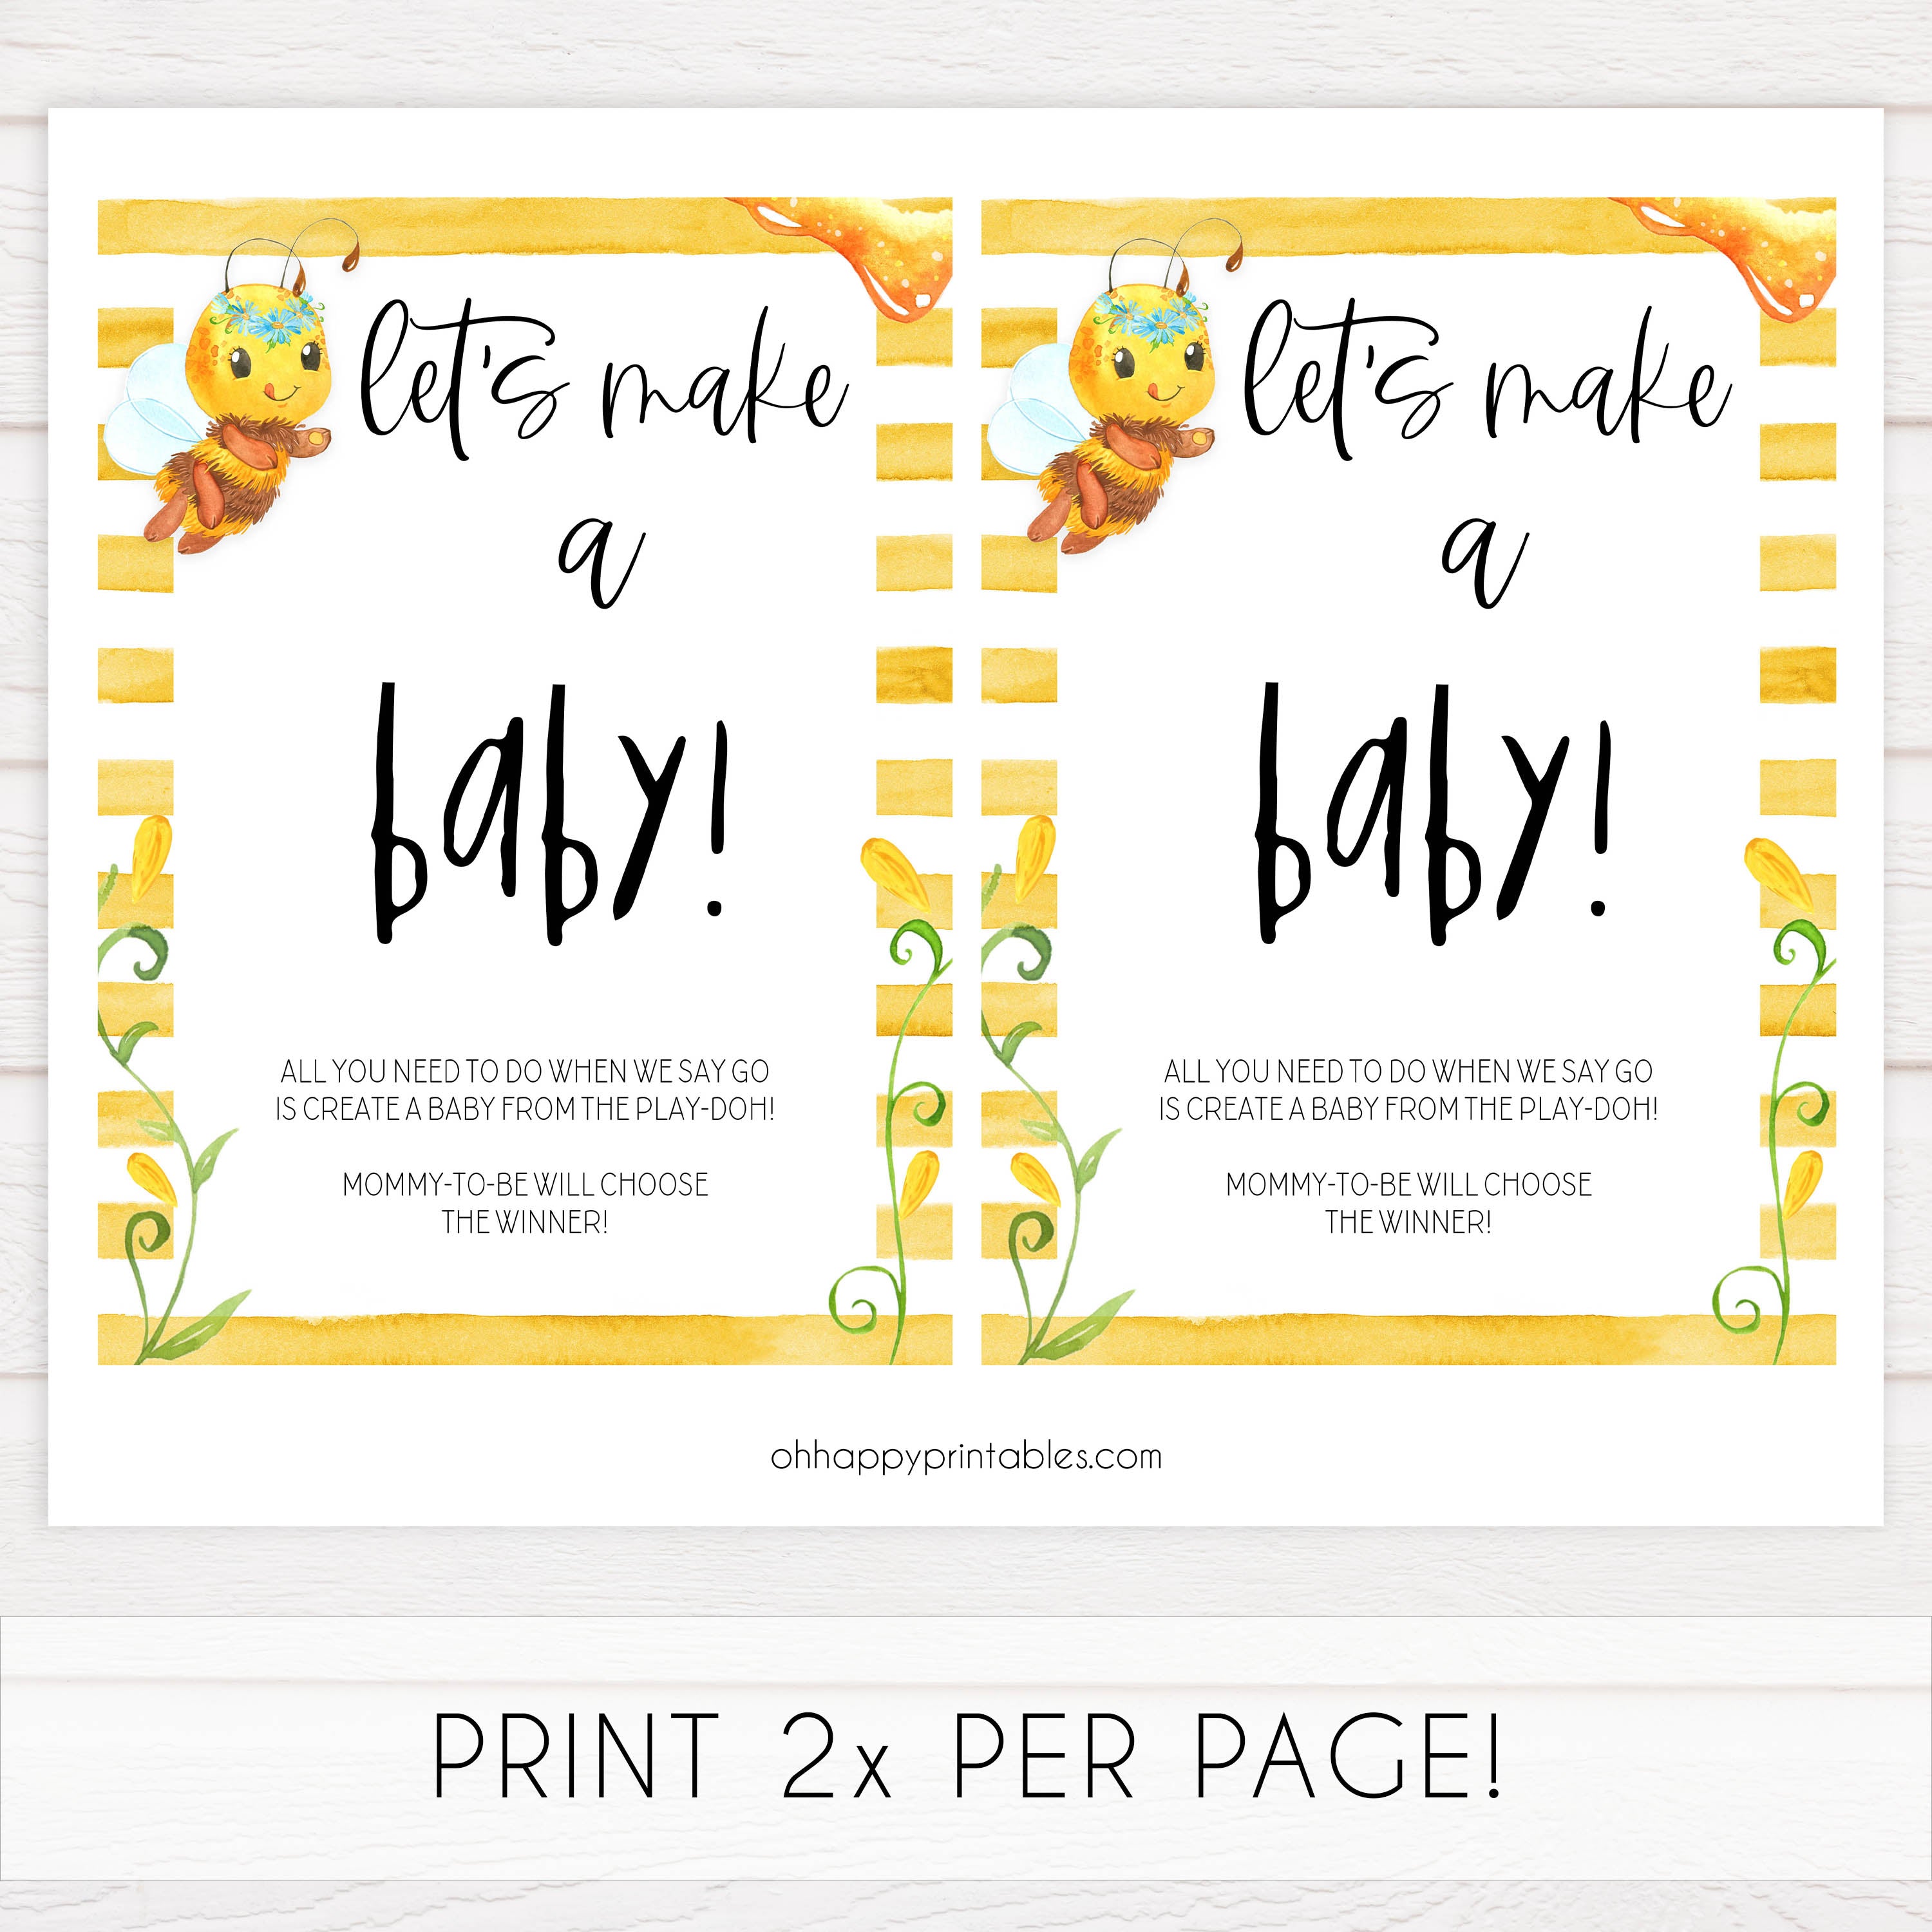 lets make a baby game, baby making game, Printable baby shower games, mommy bee fun baby games, baby shower games, fun baby shower ideas, top baby shower ideas, mommy to bee baby shower, friends baby shower ideas